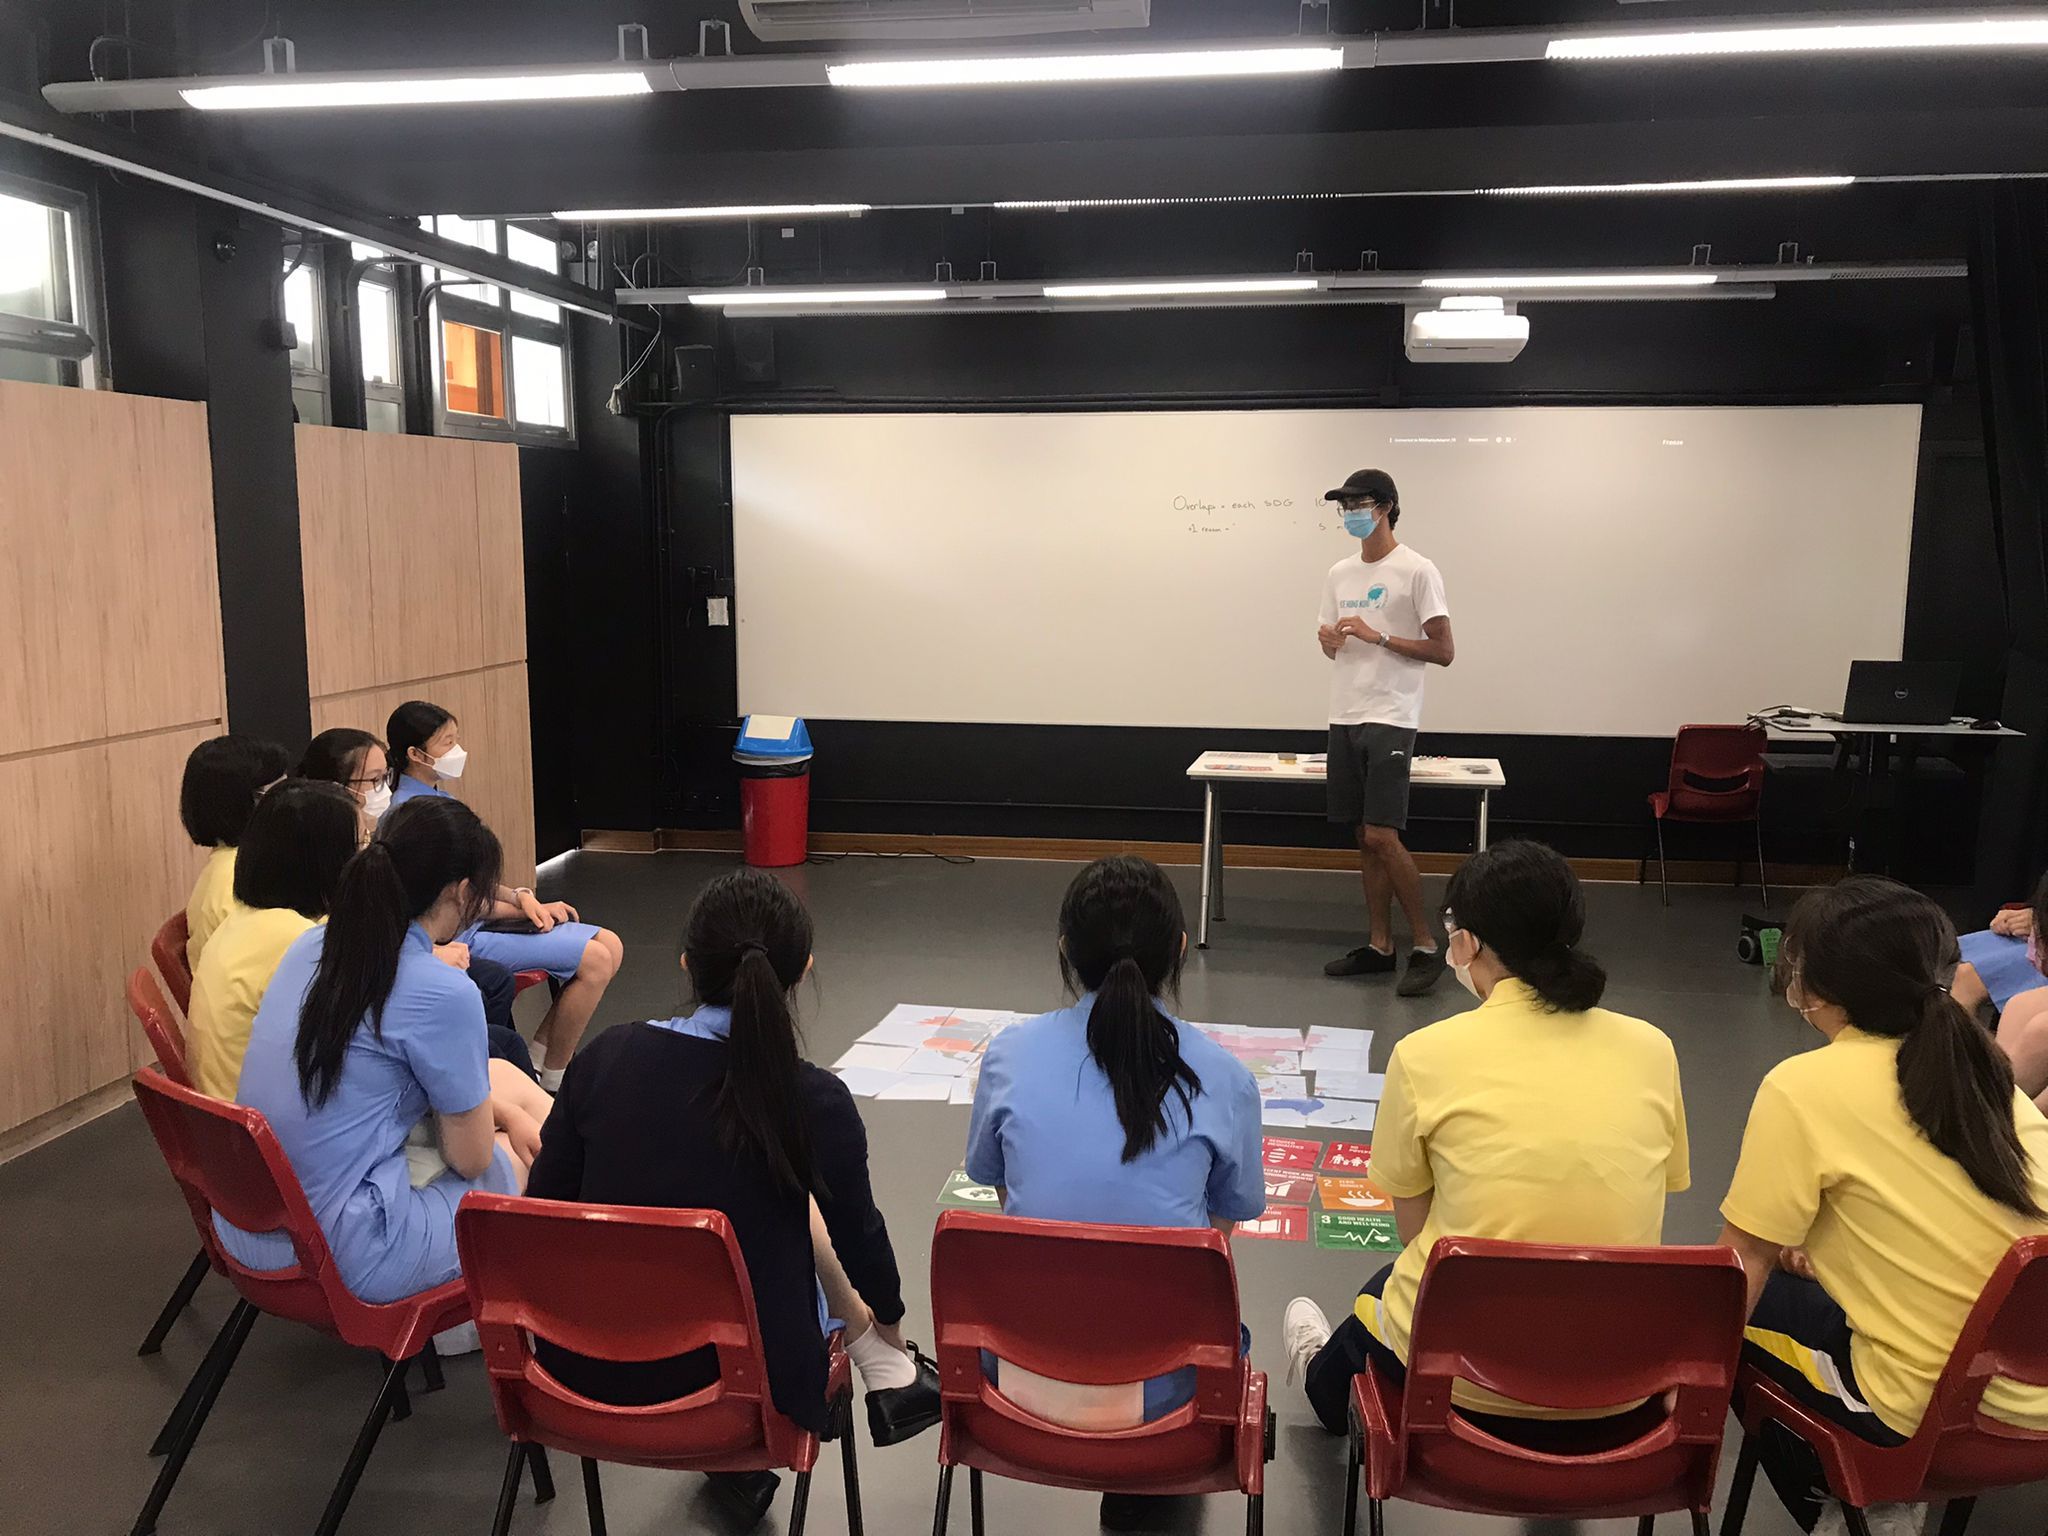 Serag teaching a group of young students about the SDGs. Credit: Intercultural Education Hong Kong.